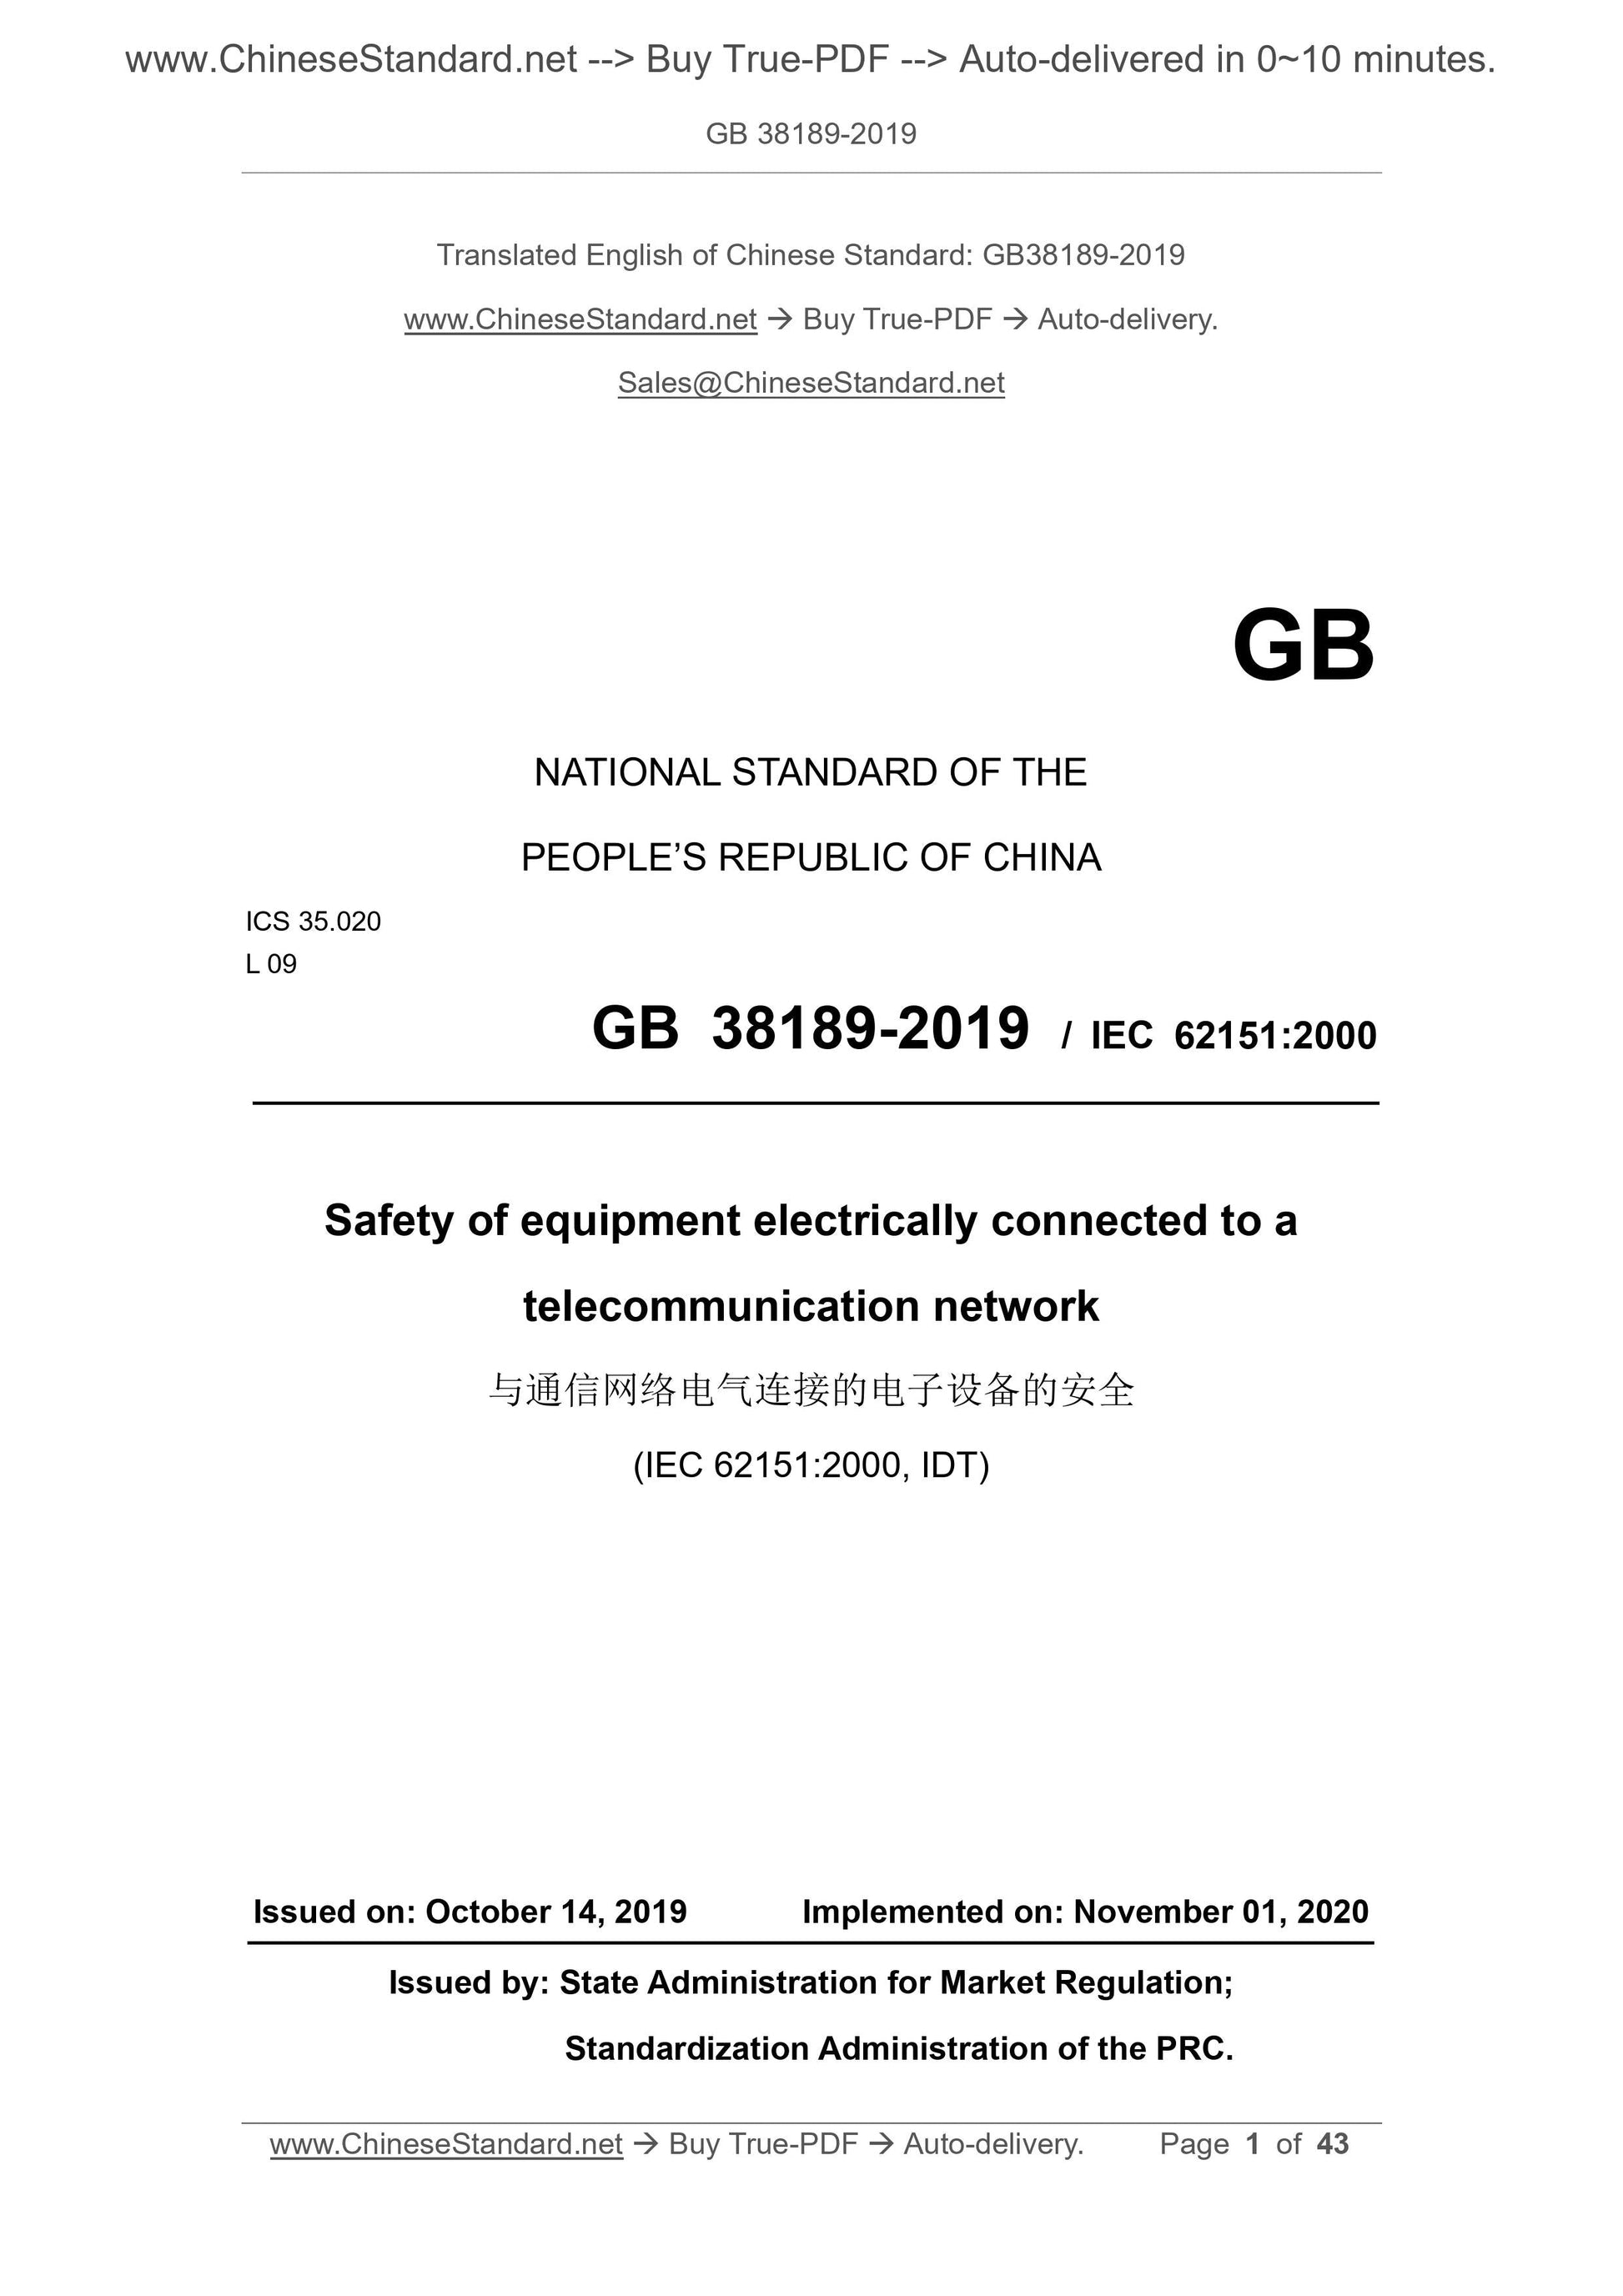 GB 38189-2019 Page 1